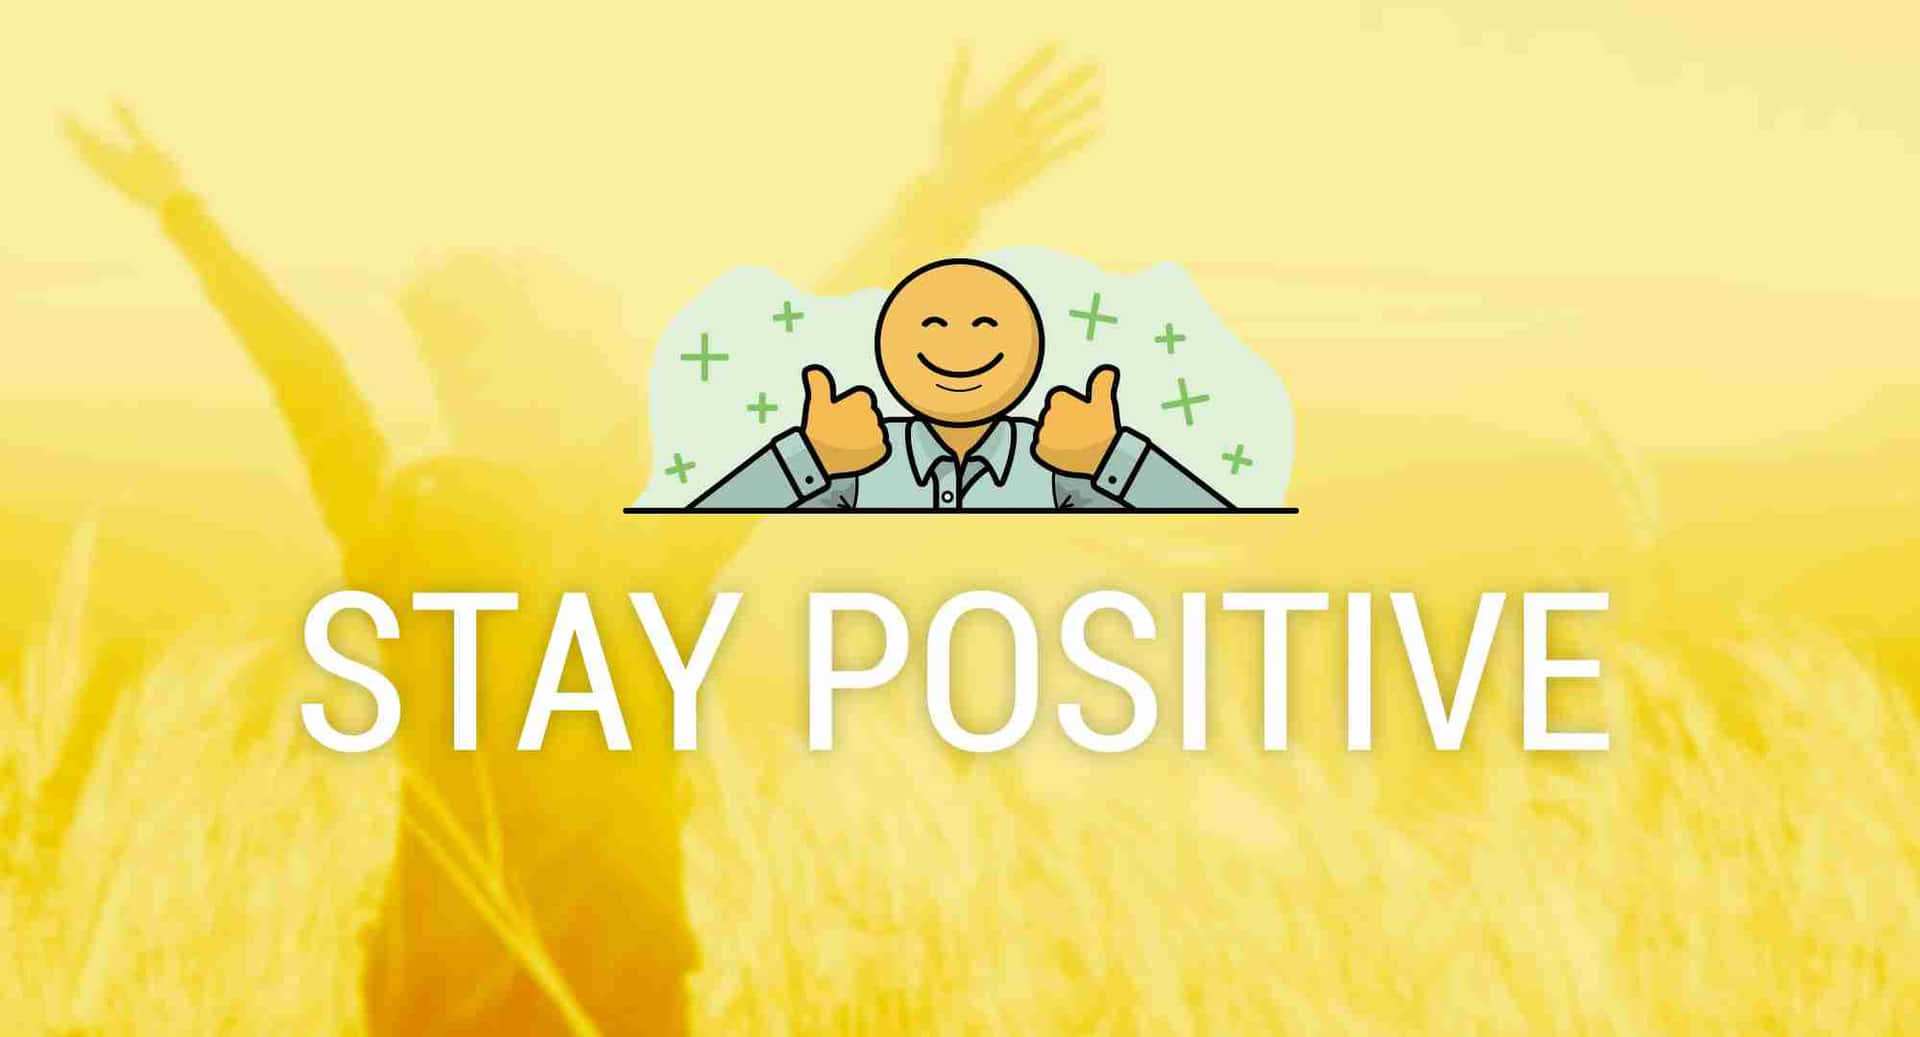 Positive Thinking Yellow Thumbs Up Picture